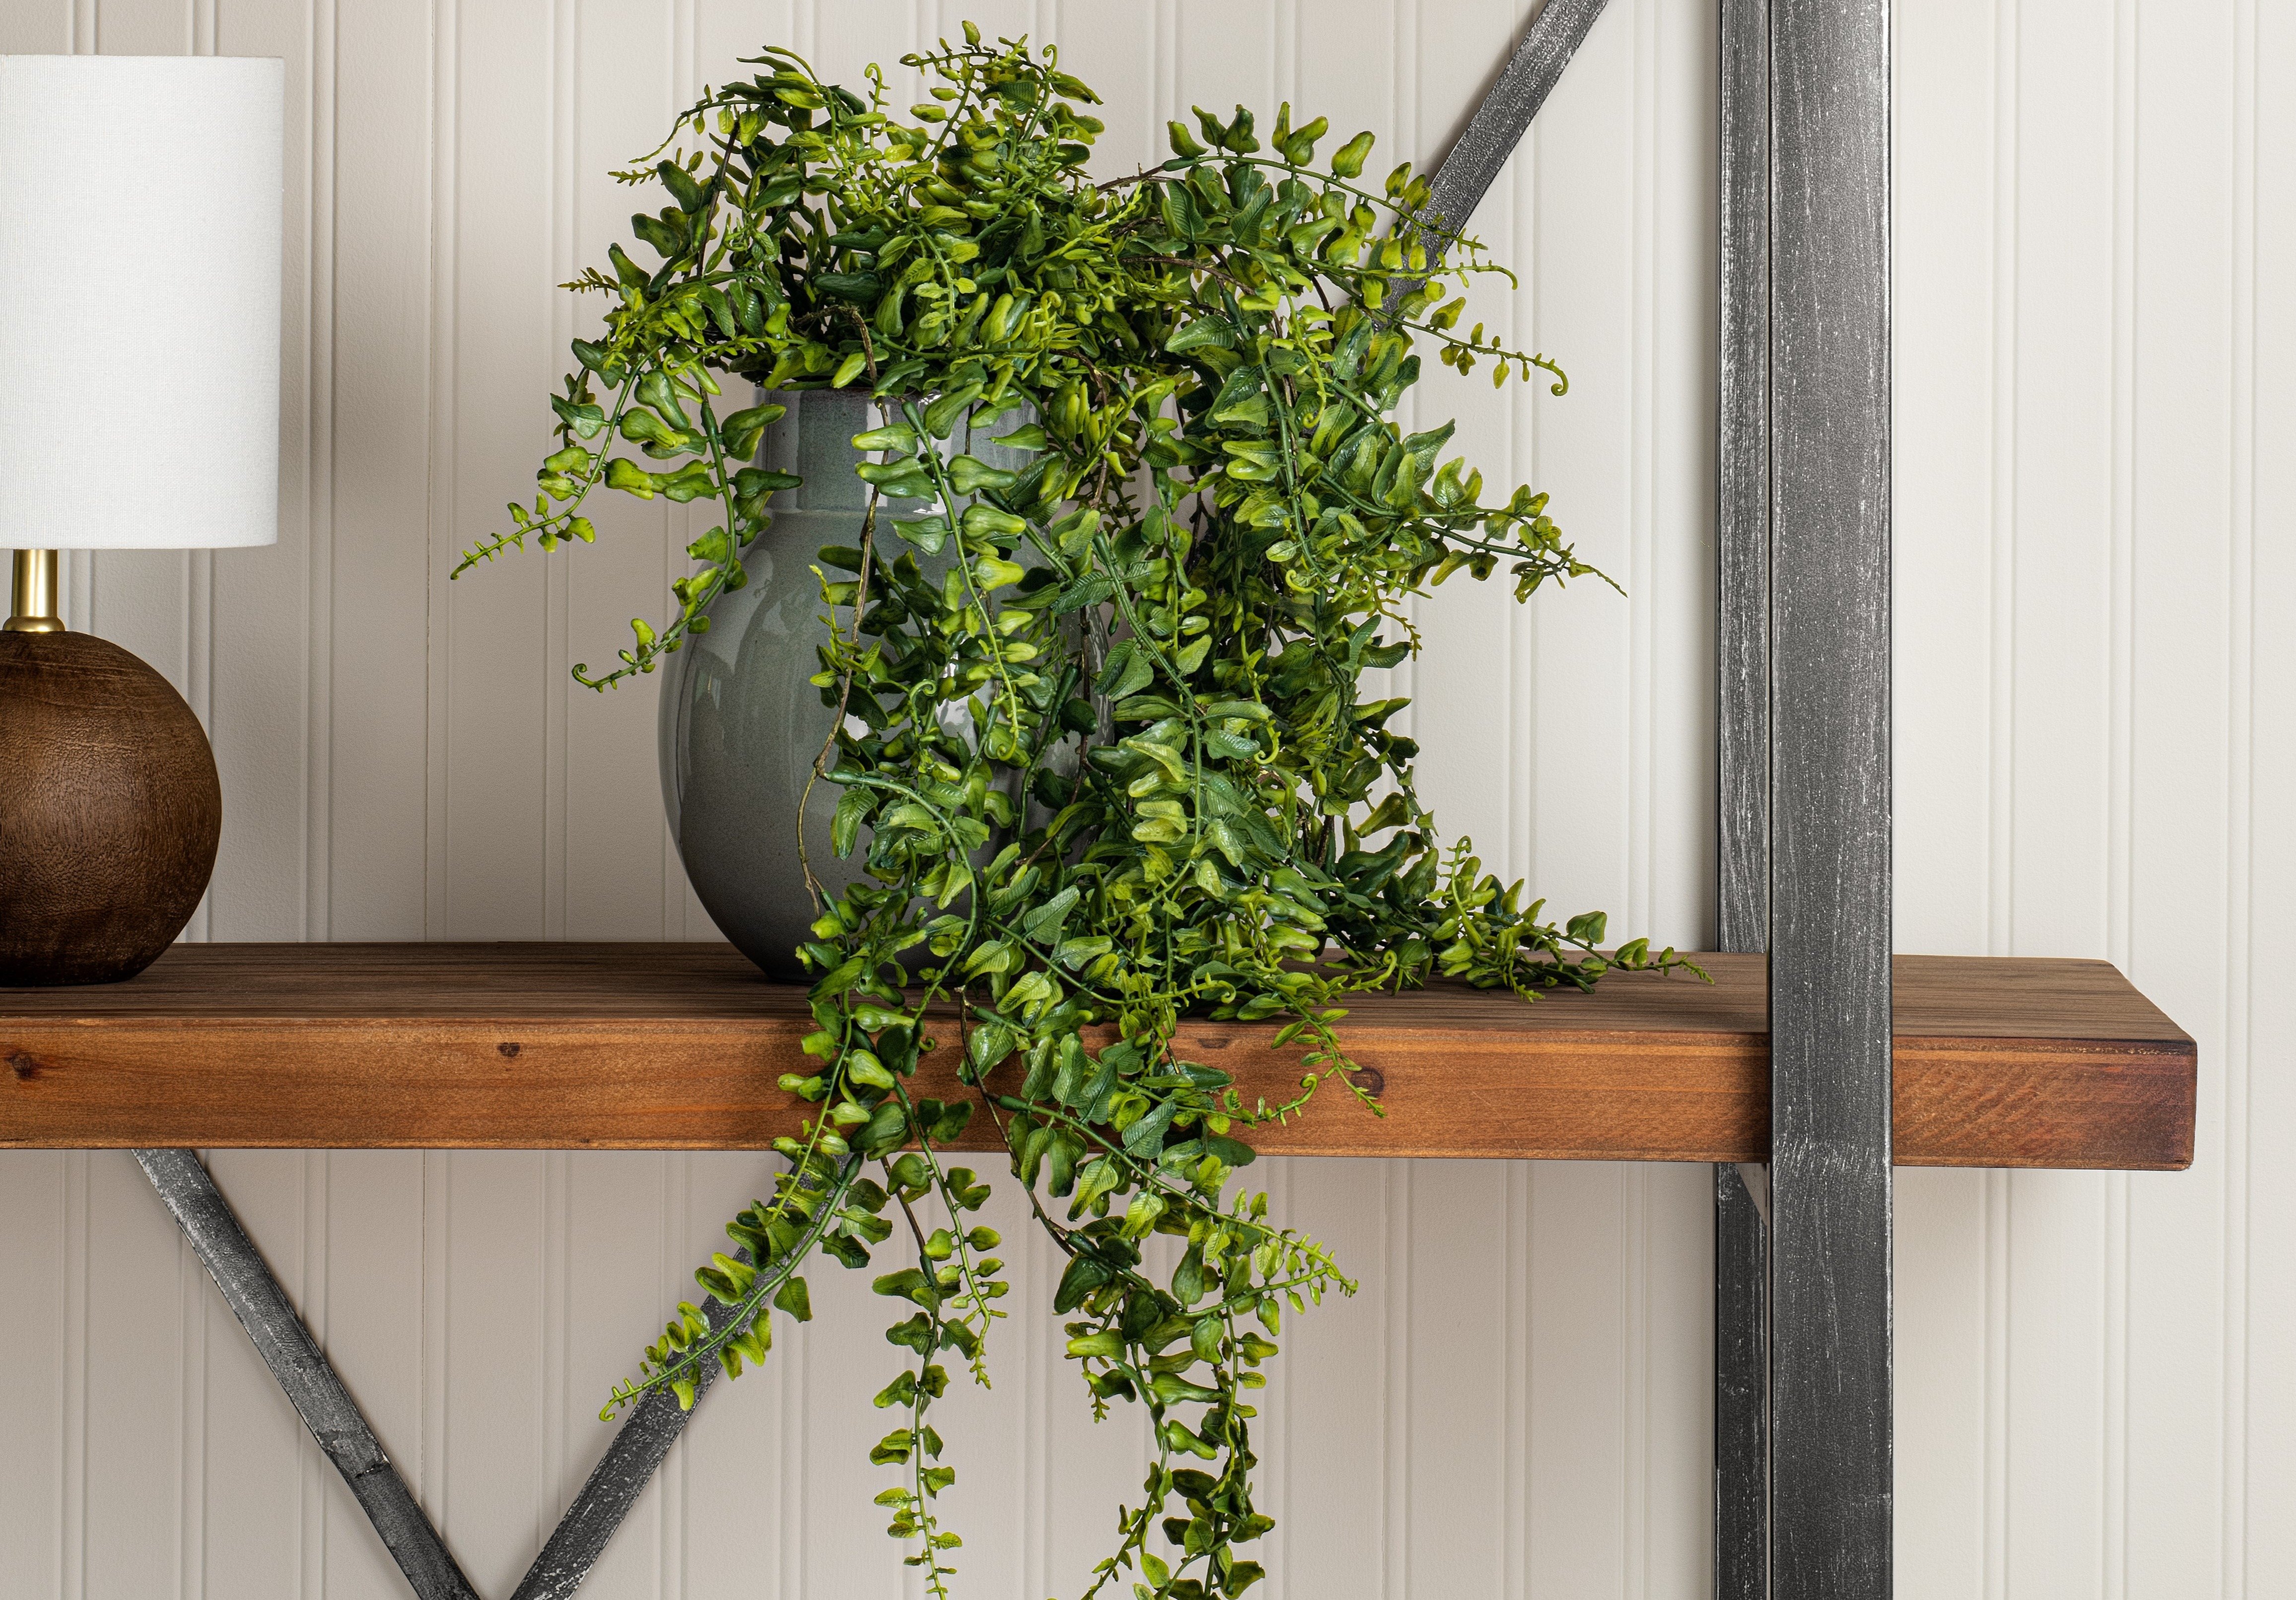 6 Tips for Your Next Faux Plant or Floral Project